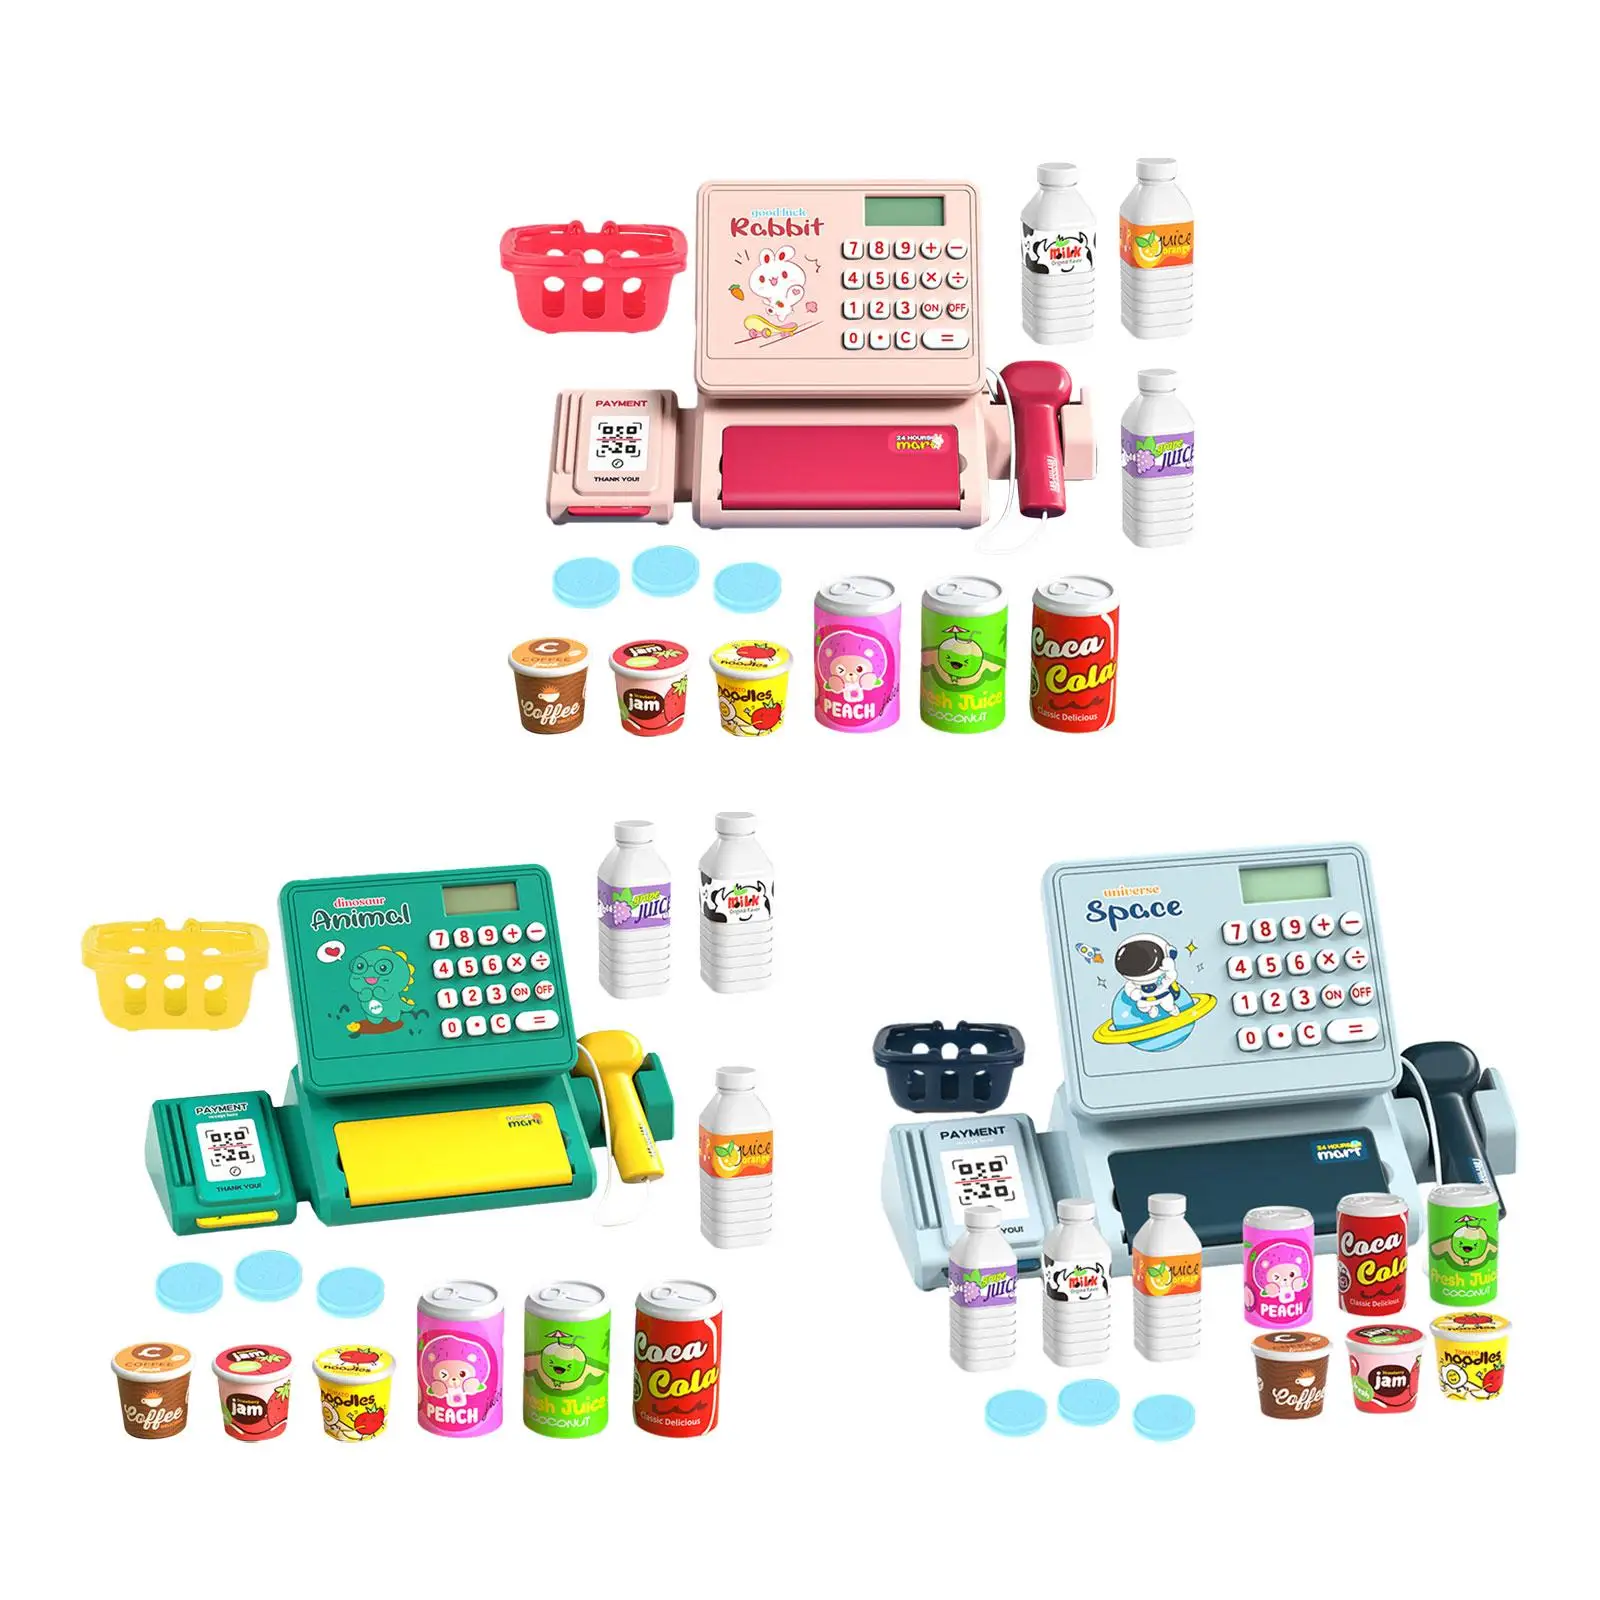 

Pretend Role Play Shopping till Food Toys Pretend Play Calculator Cash Register for Girls Boys 3 + Years Old Toddlers Kids Gifts